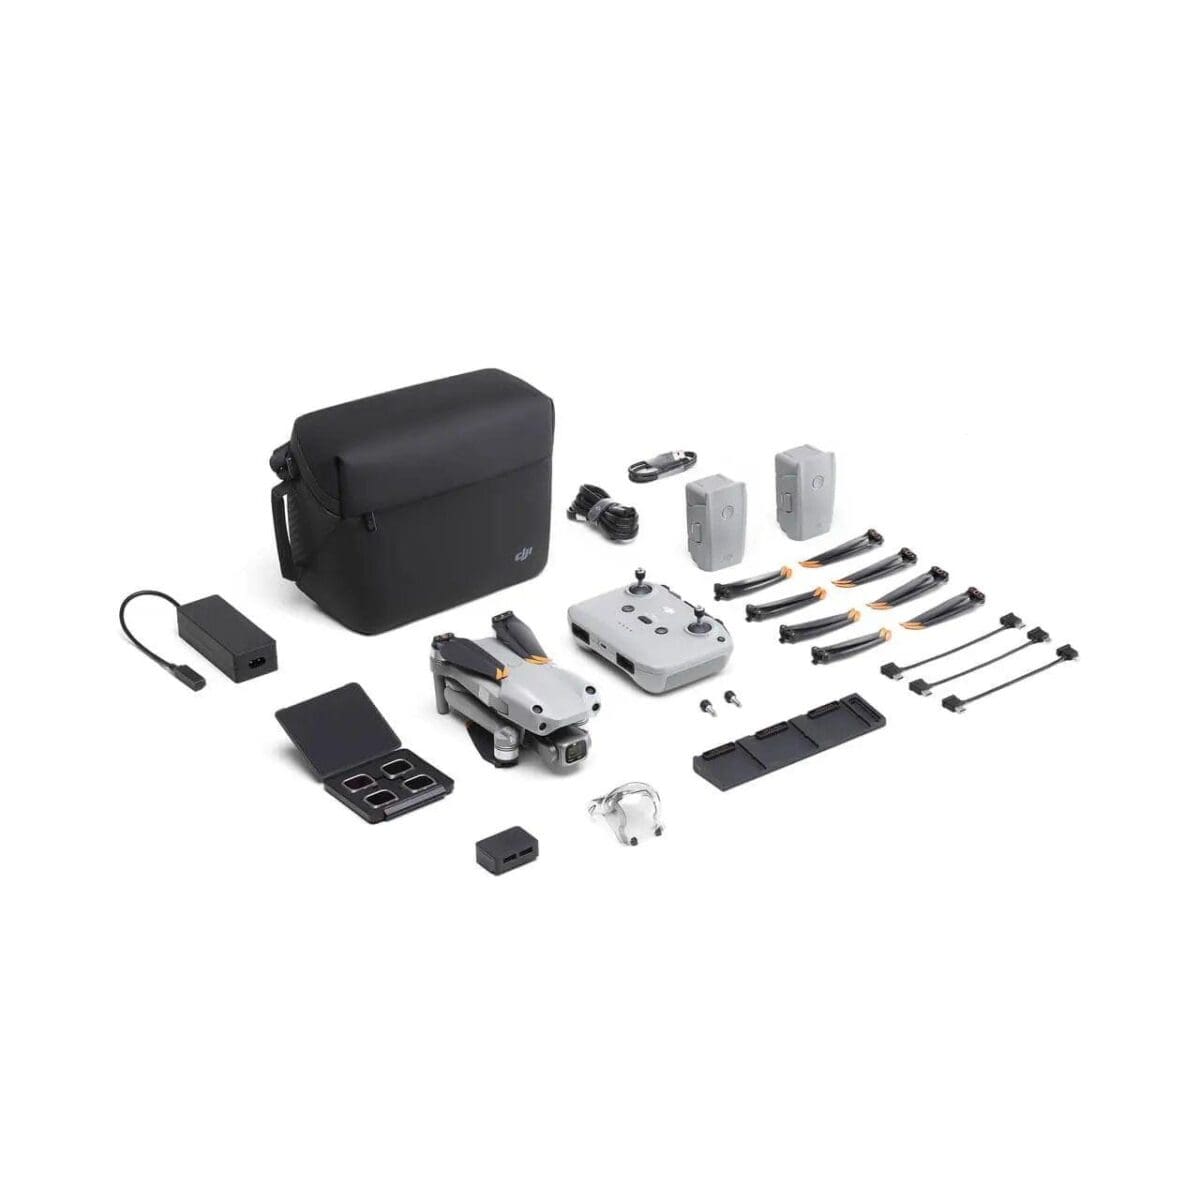 DJI Air 2S Fly More Combo (1-inch Sensor Quadcopter Drone All-in-One Combo)